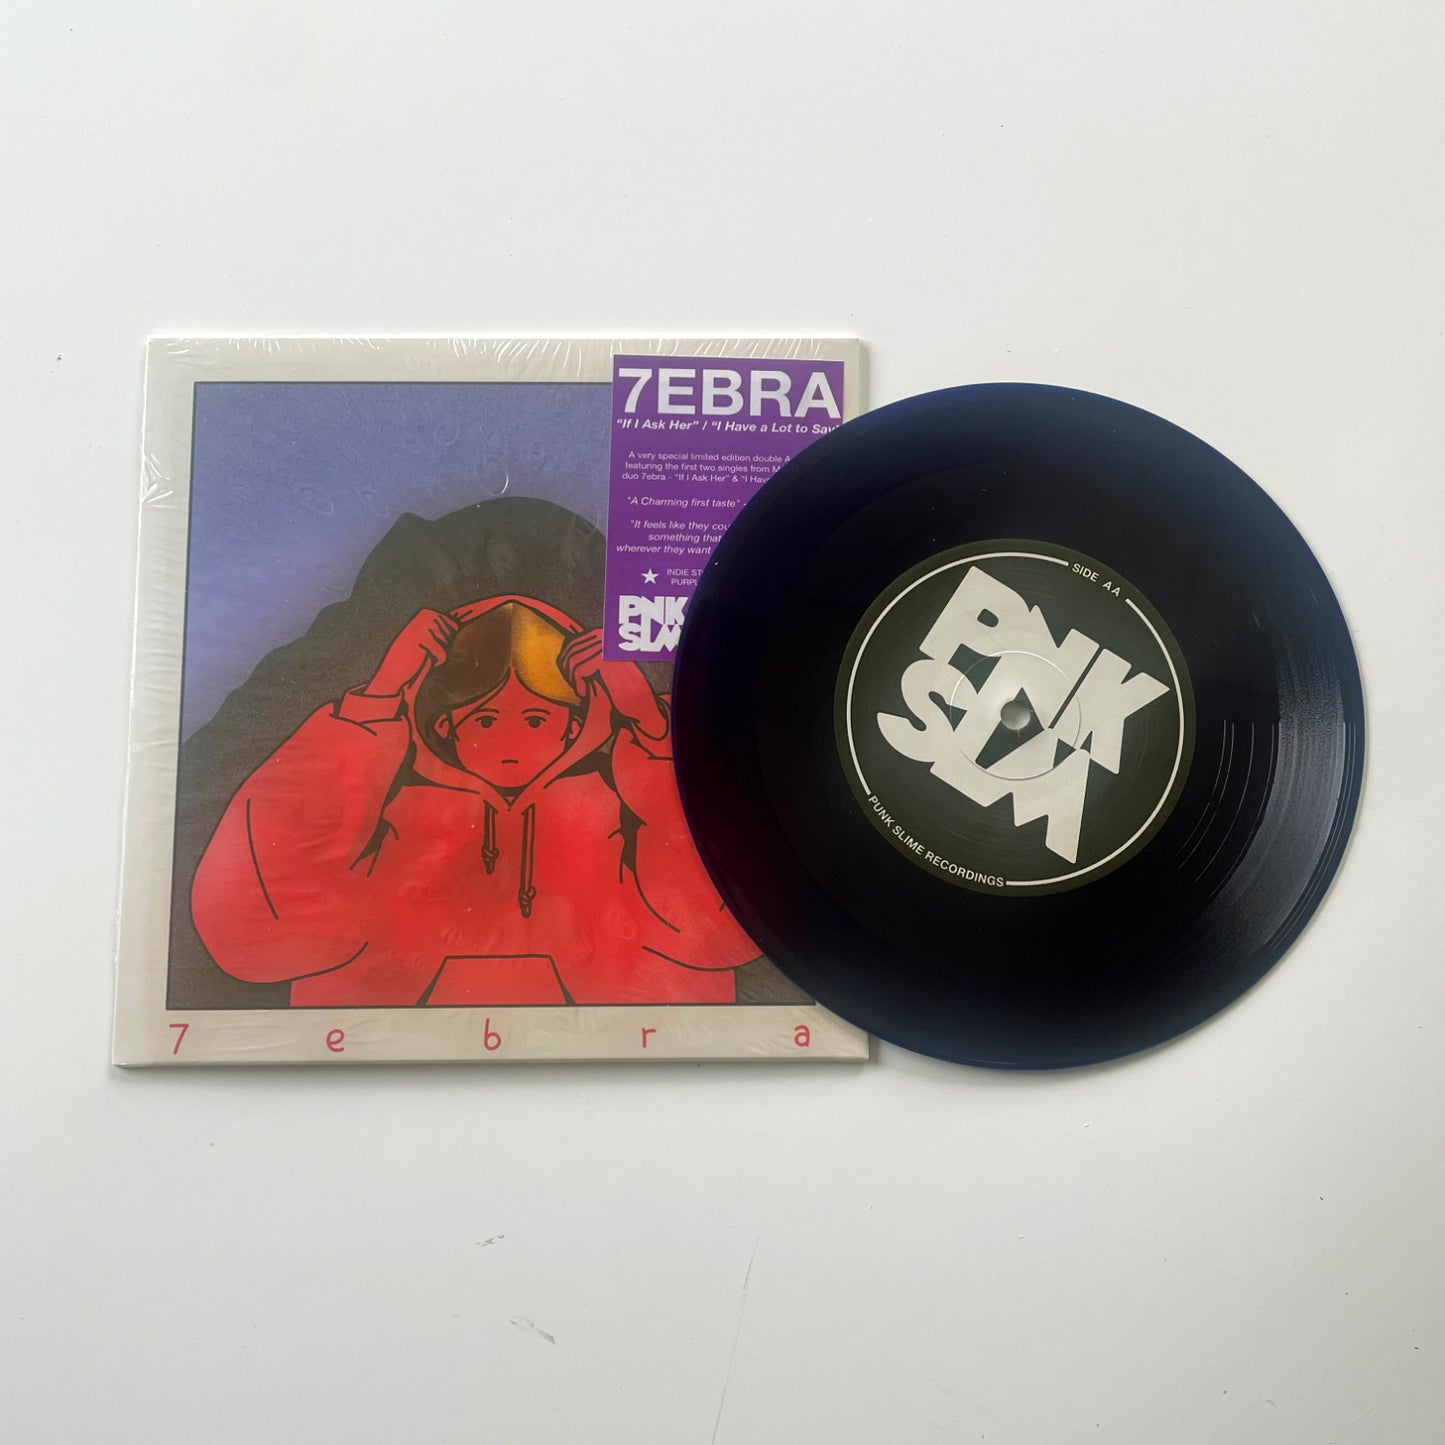 7ebra - I Have a Lot to Say / If I Ask Her 7"